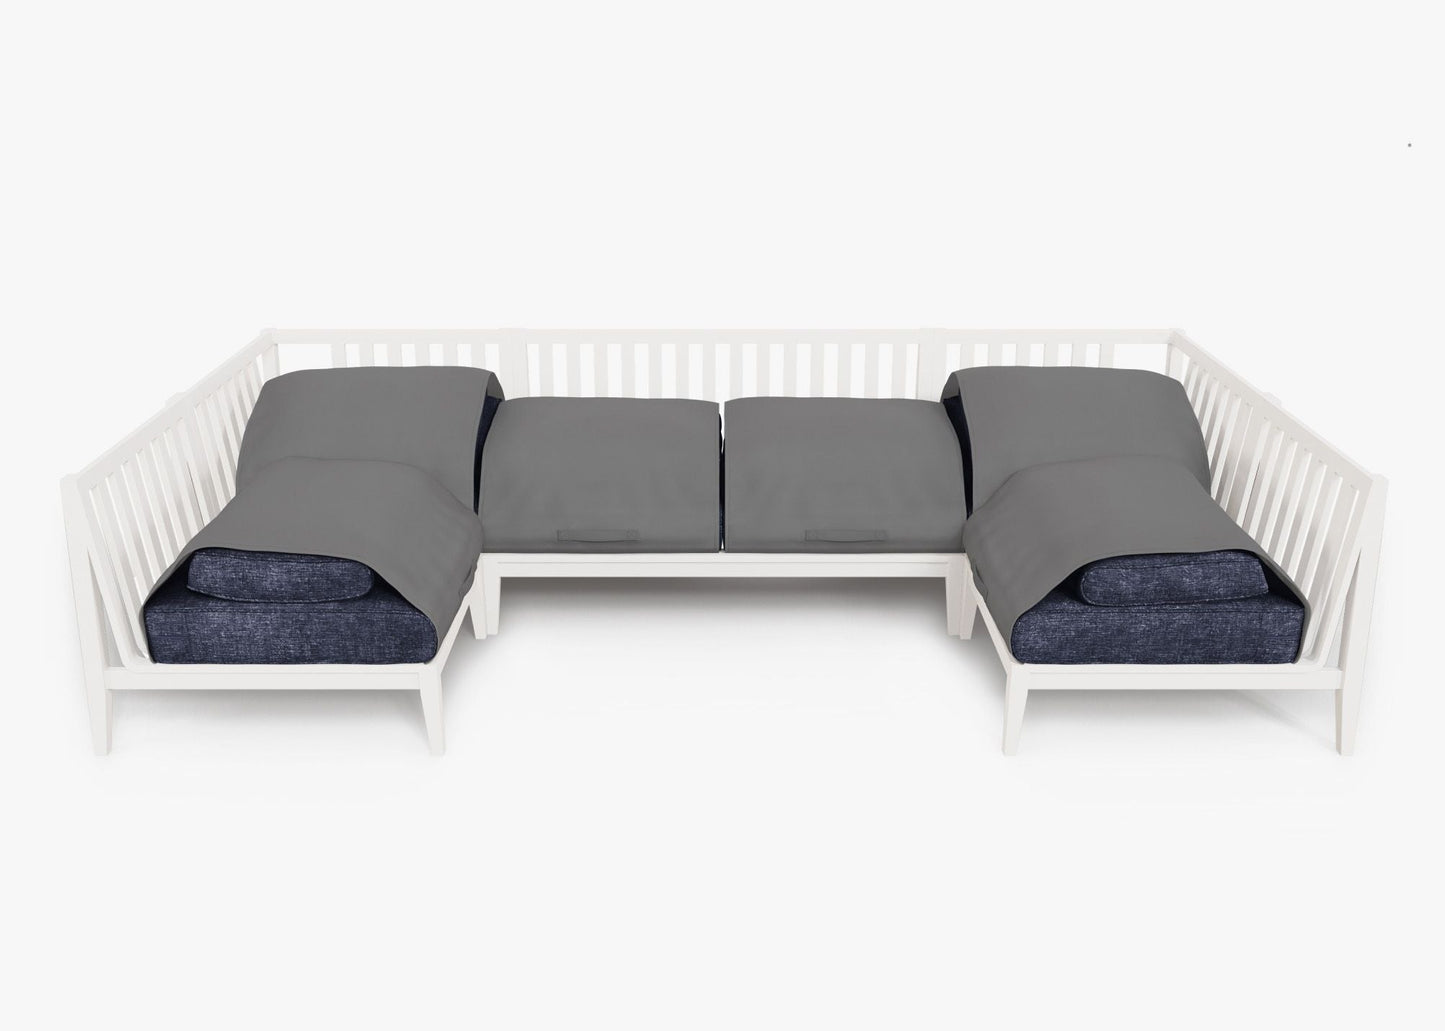 Live Outer 127" x 64" White Aluminum Outdoor U Sectional 6-Seat With Deep Sea Navy Cushion